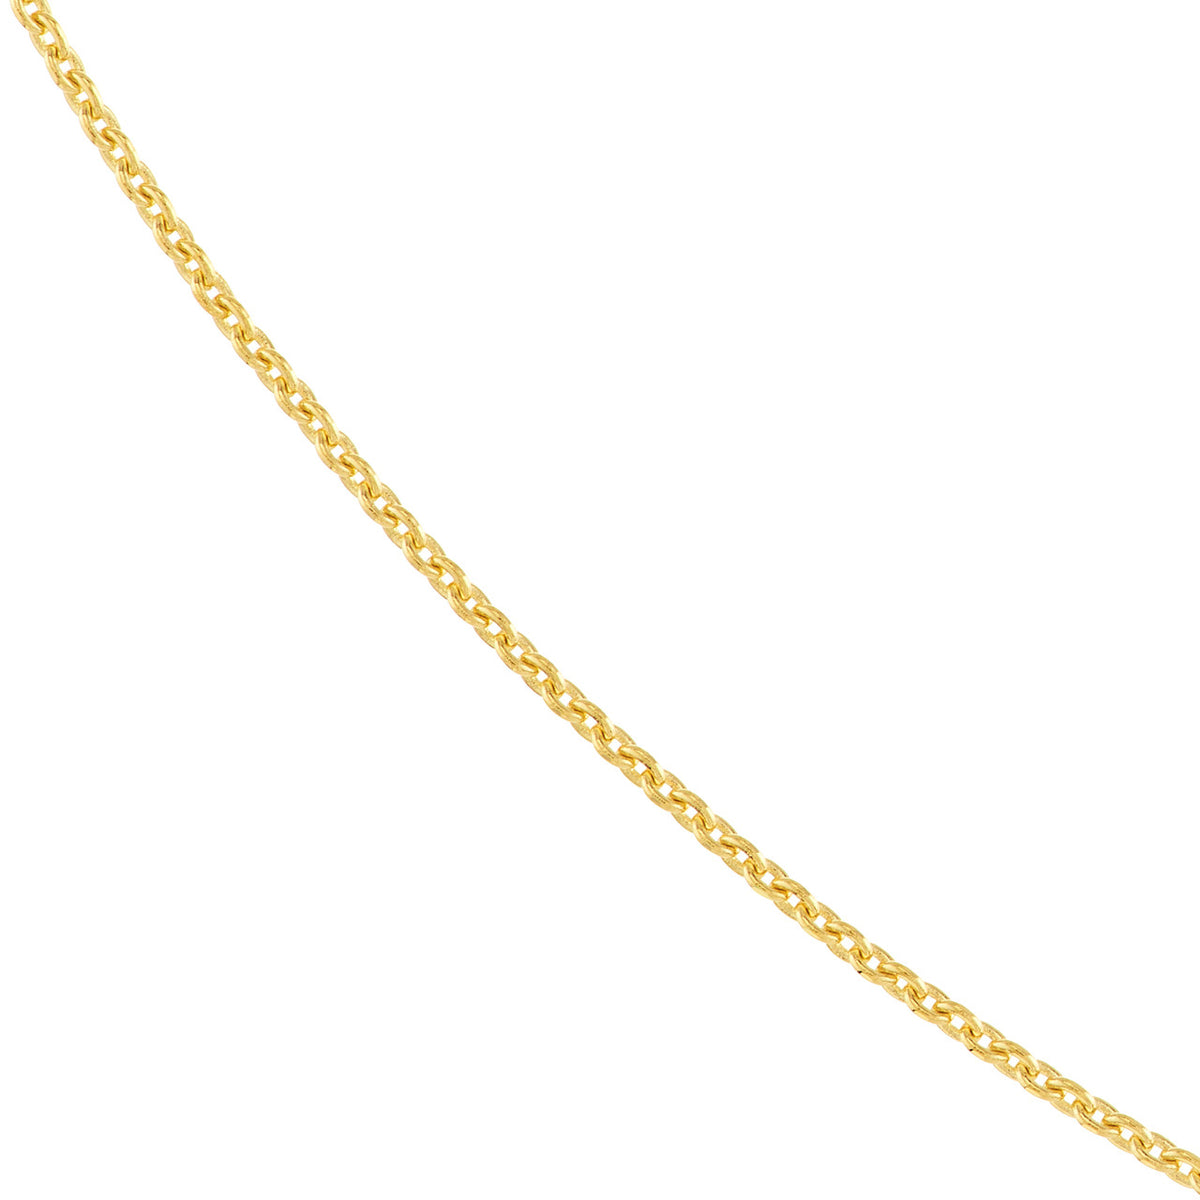 14K Yellow Gold and White Gold 0.7mm Cable Chain Necklace with Spring Ring